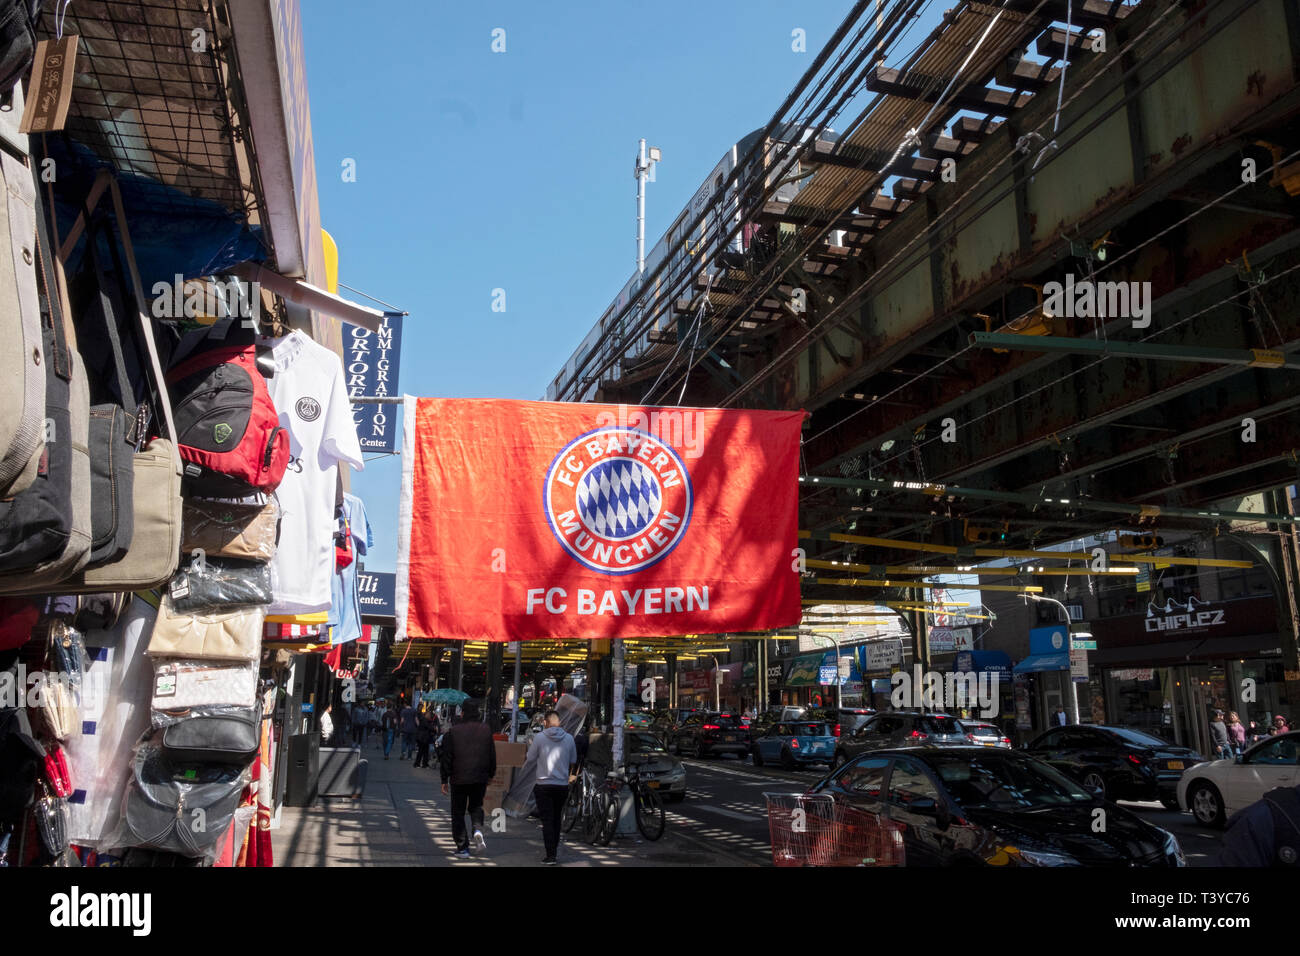 A large banner for the german football soccer club FC BAYERN MUNICH hanging in from of a store on Roosevelt Ave. in Corona, Queens, New York City. Stock Photo